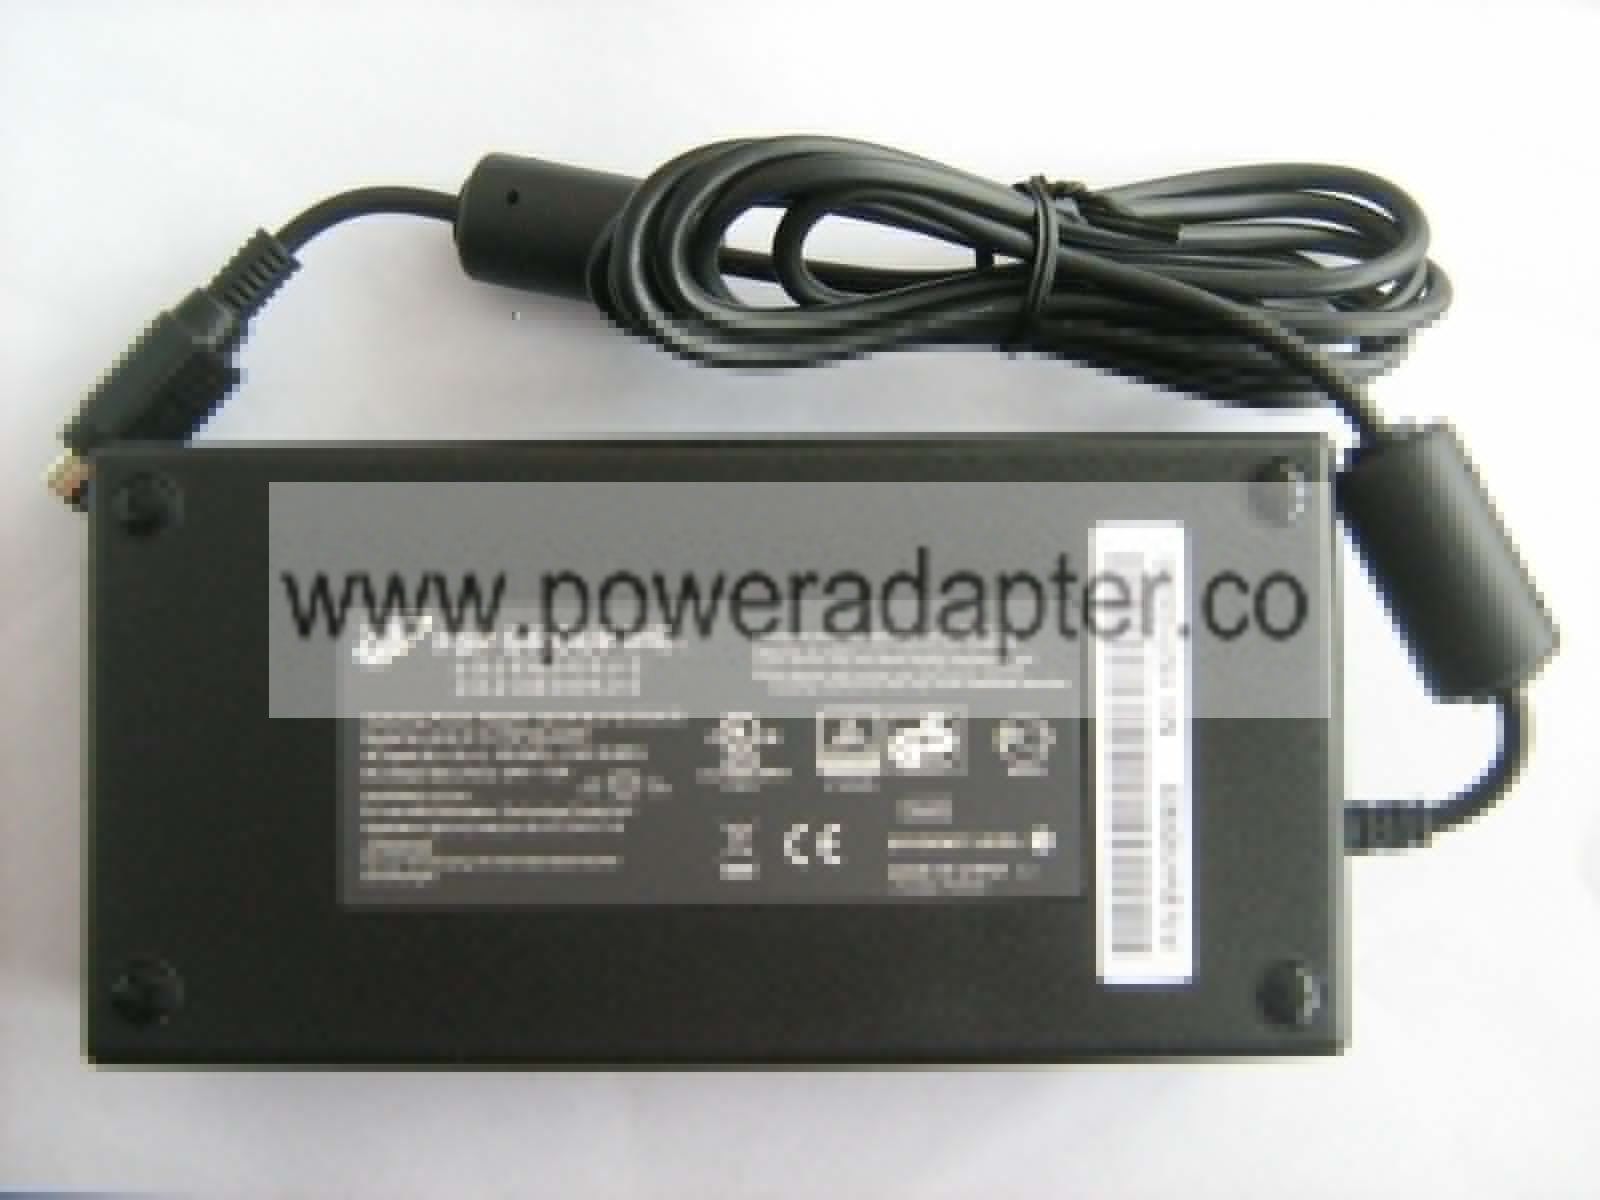 Genuine FSP FSP180-AAAN1 180W 24V 7.5A Power Supply AC DC Adapter FSP180-AAA Country/Region of Manufacture: China Ou